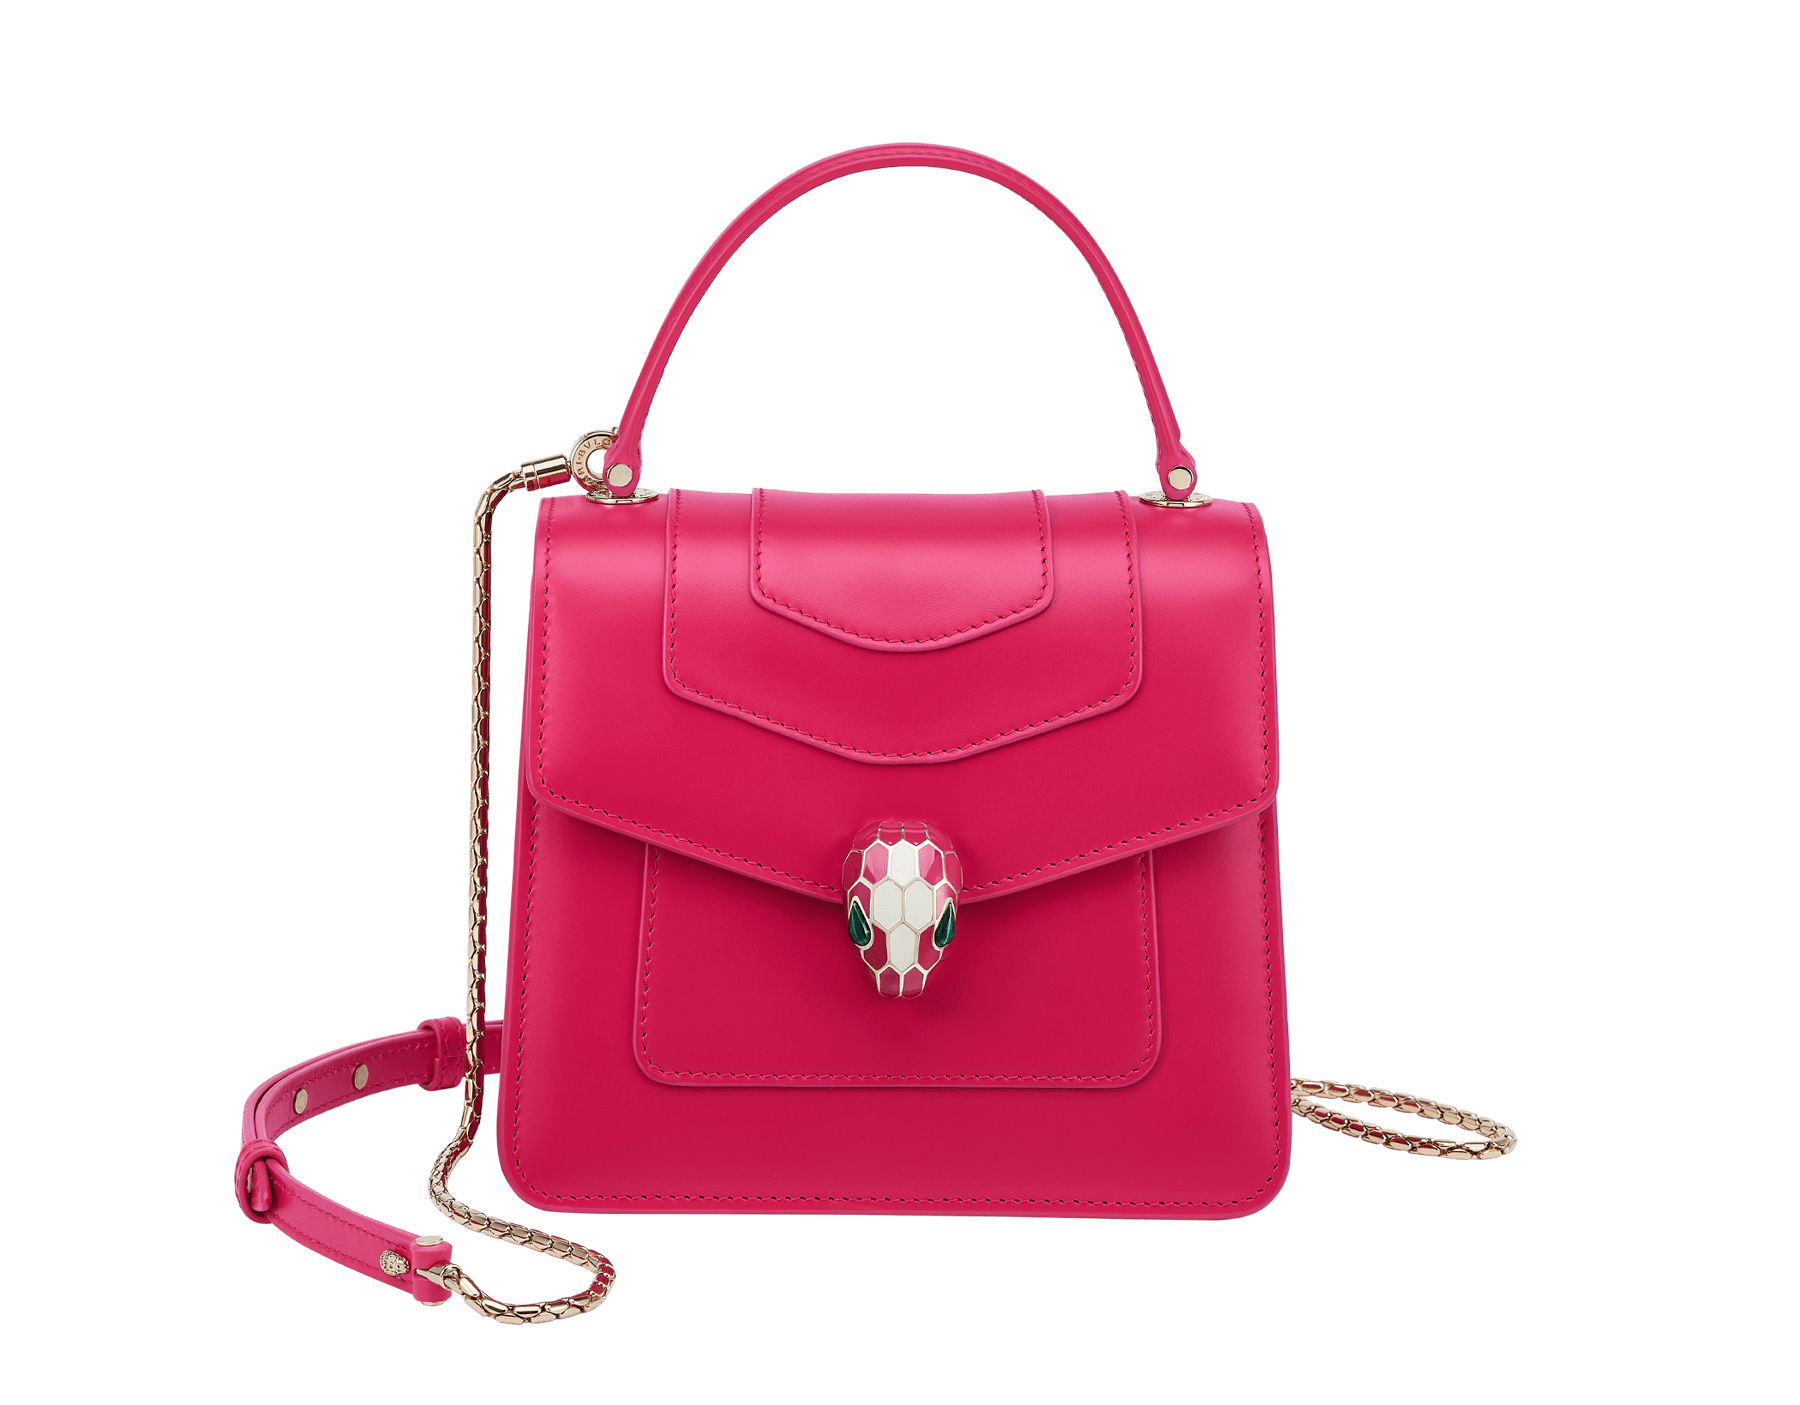 “Serpenti Forever ” top-handle bag in Lavender Amethyst lilac calf leather with Reef Coral red grosgrain inner lining. Iconic snakehead closure in light gold-plated brass embellished with black and white agate enamel and green malachite eyes 1122-CLb image 1